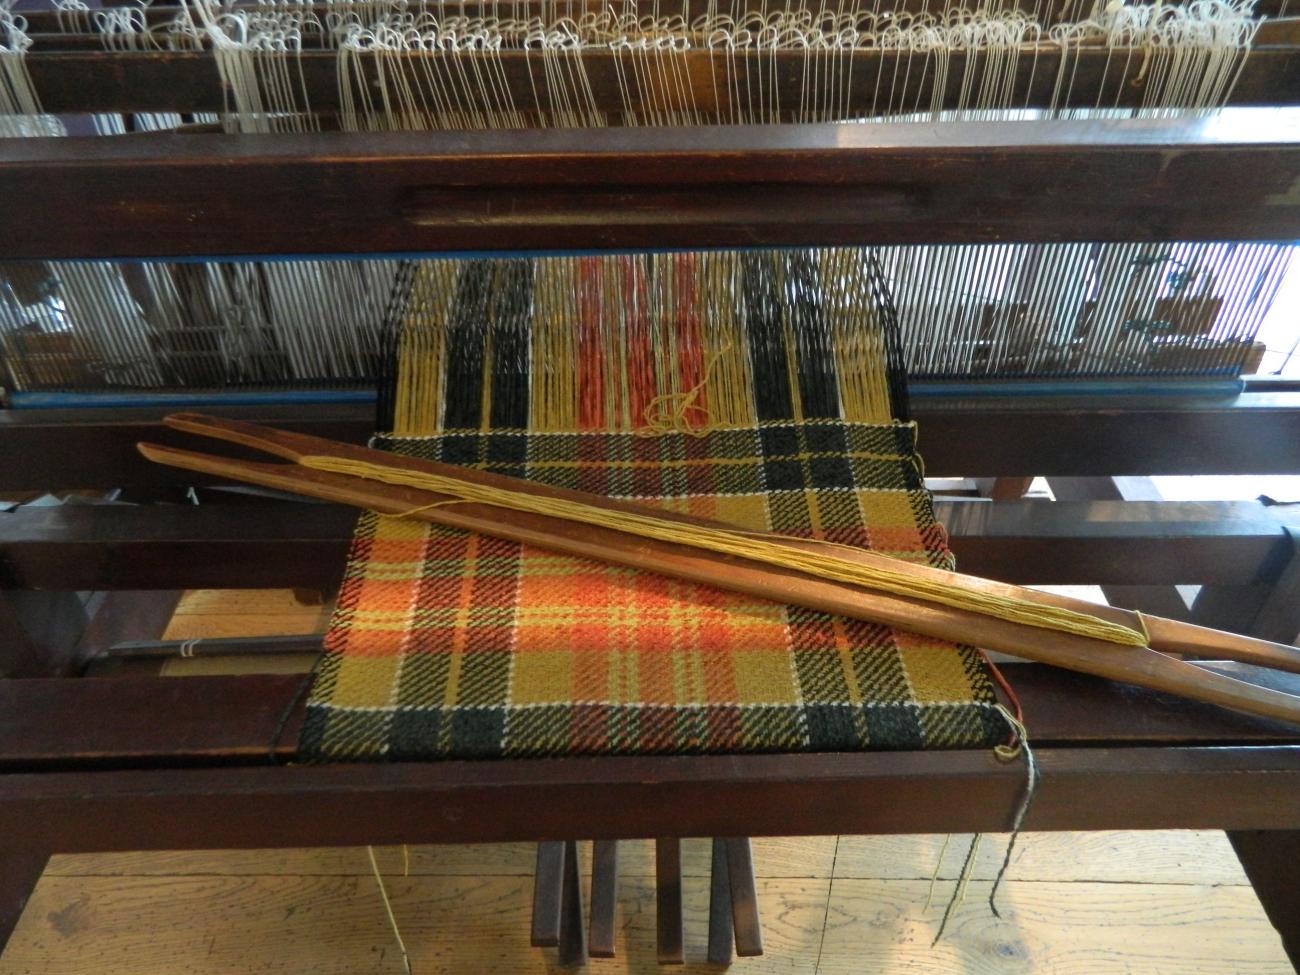 Cloth being woven on a loom